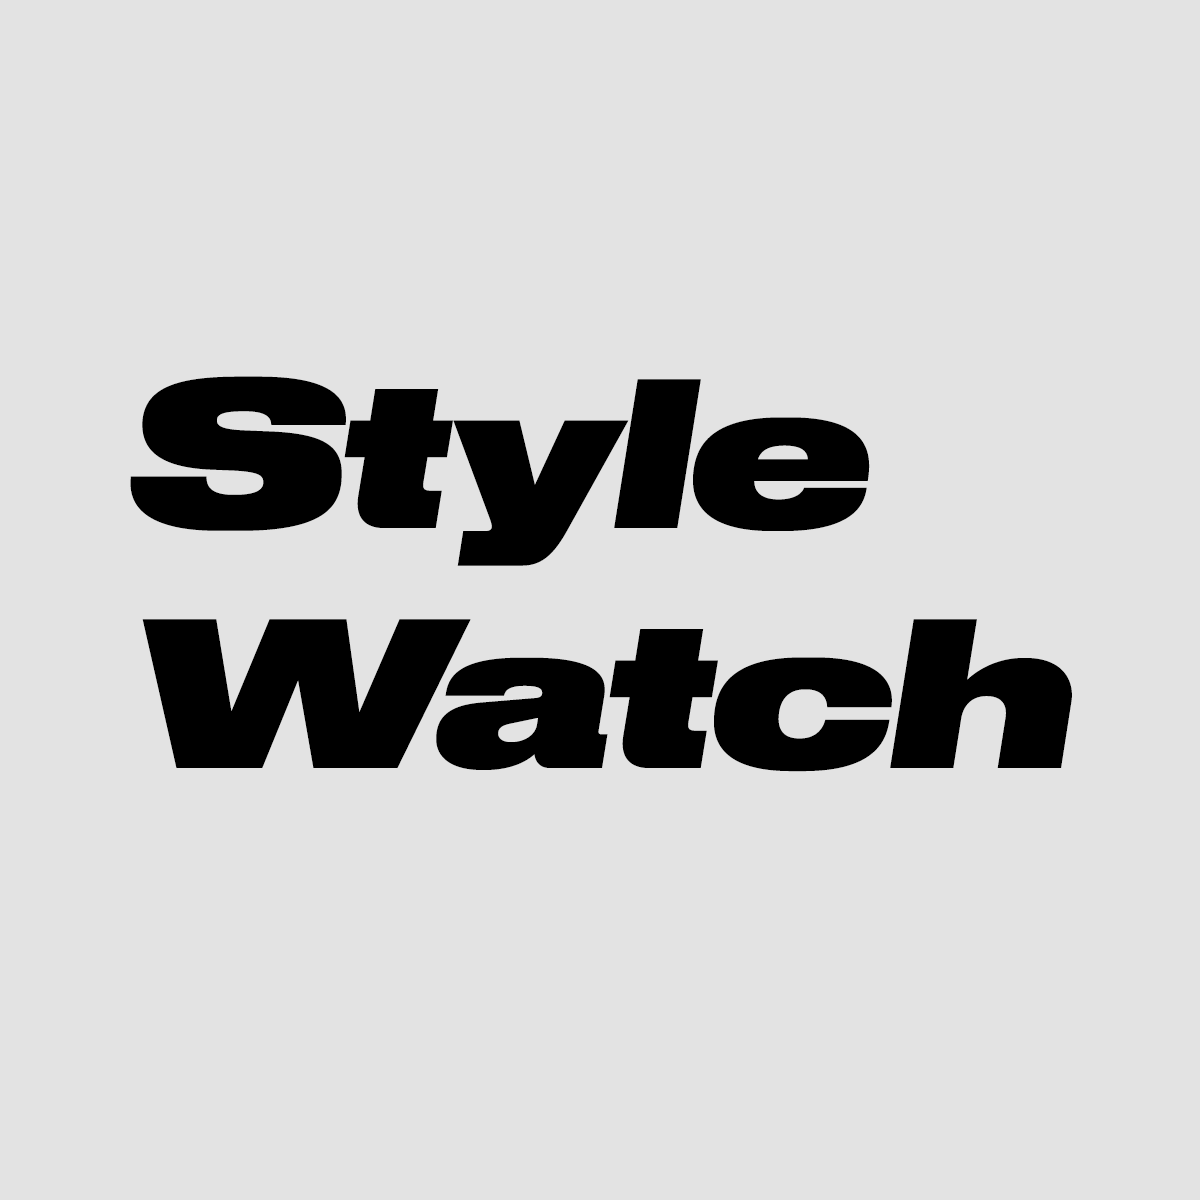 Logo of STYLEWATCH